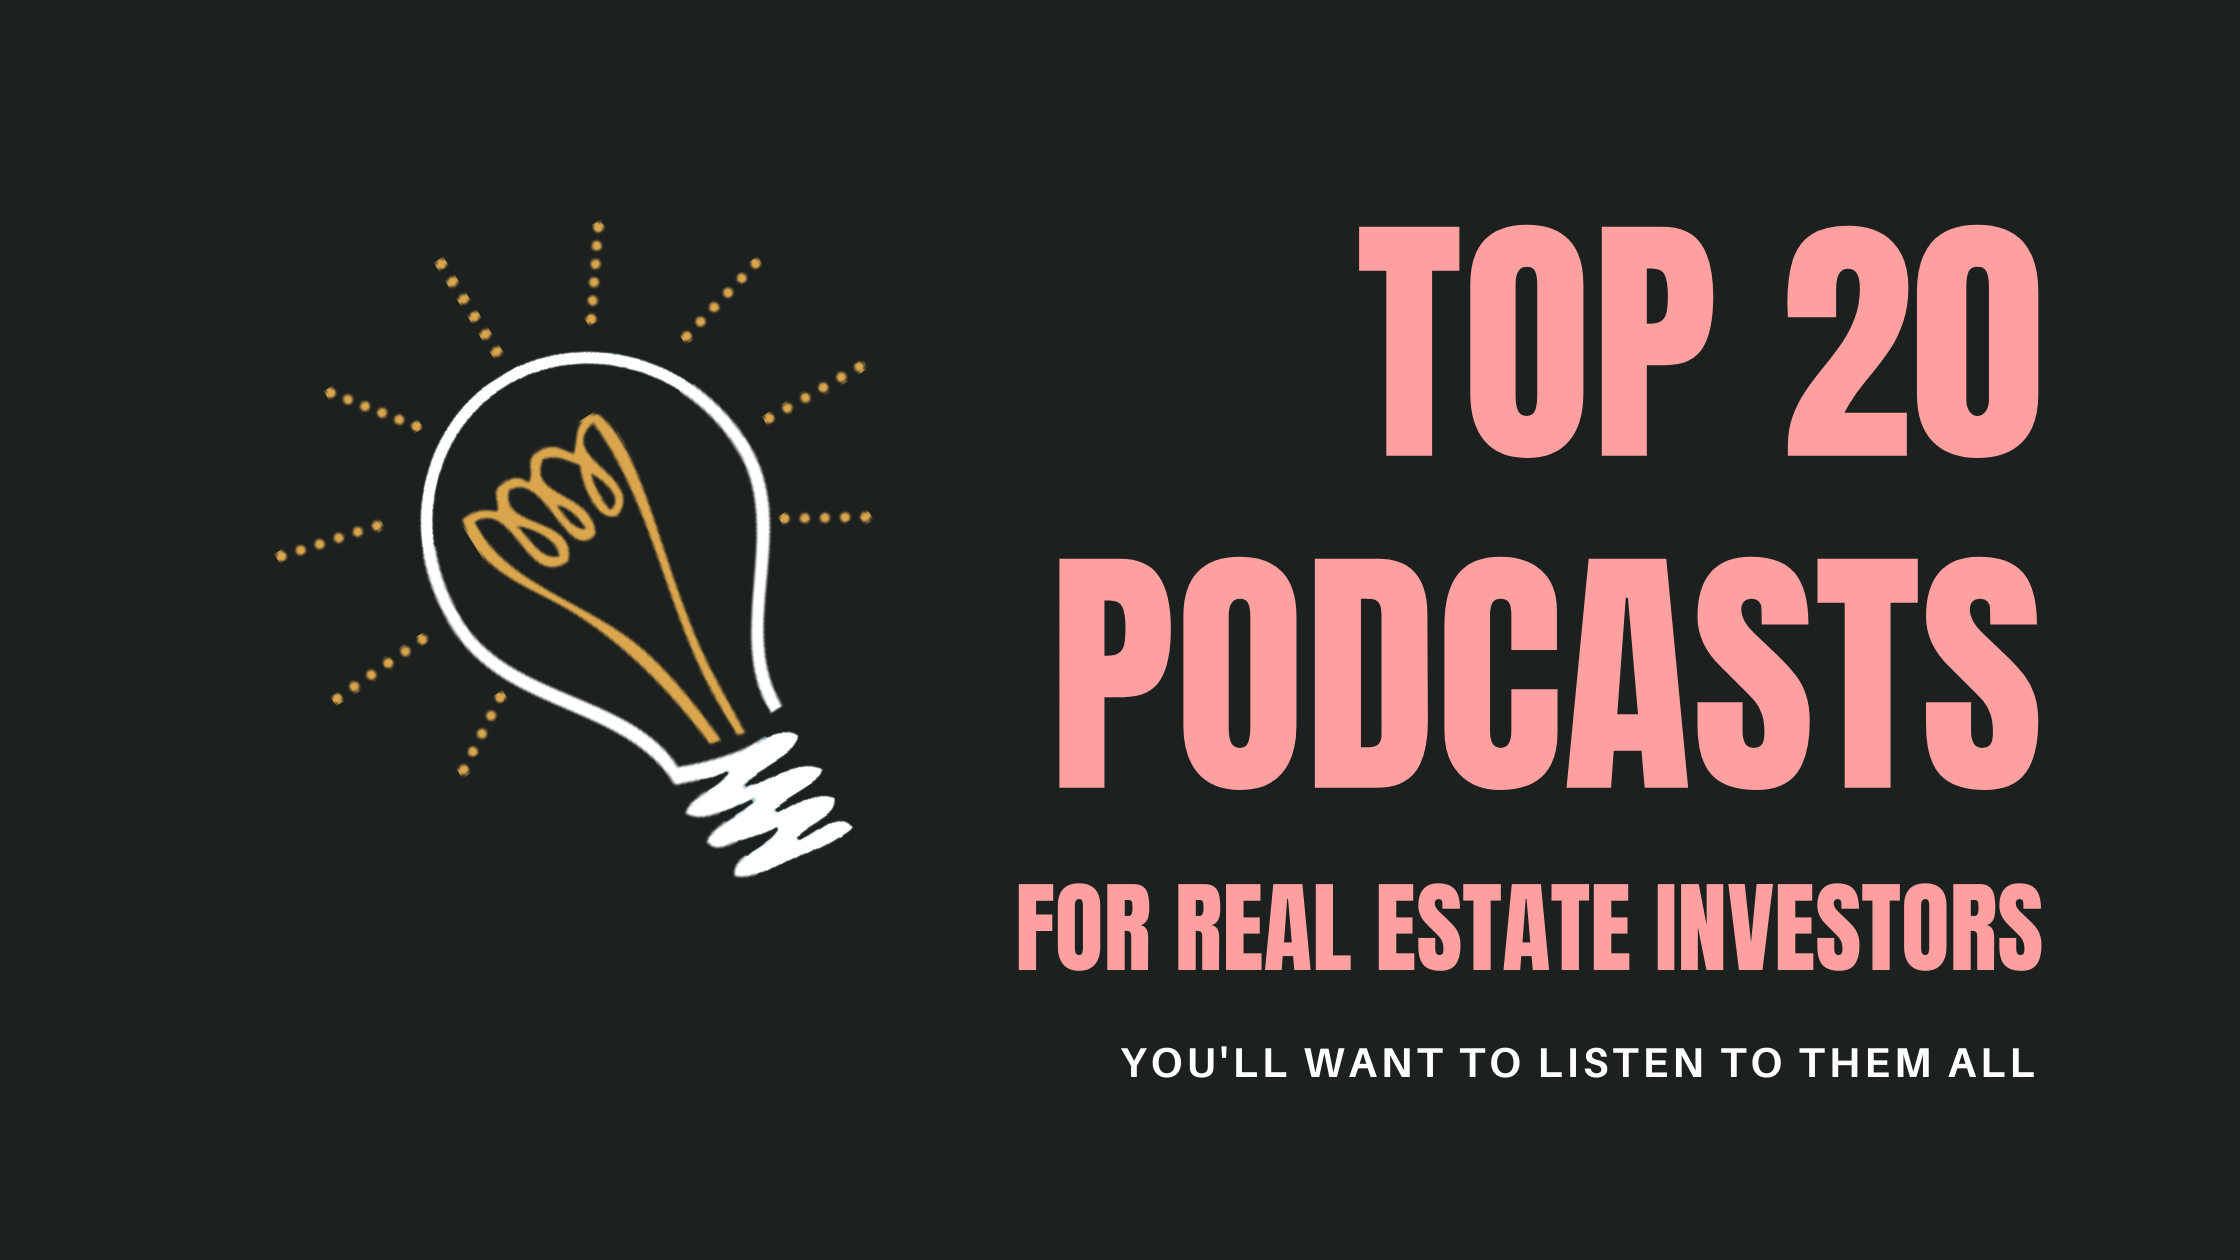 Wholesalers Making Offers in the Current Real Estate Market - EarlToms  Podcast - Wholesaling Real Estate - Podcasts on Audible - Audible.com